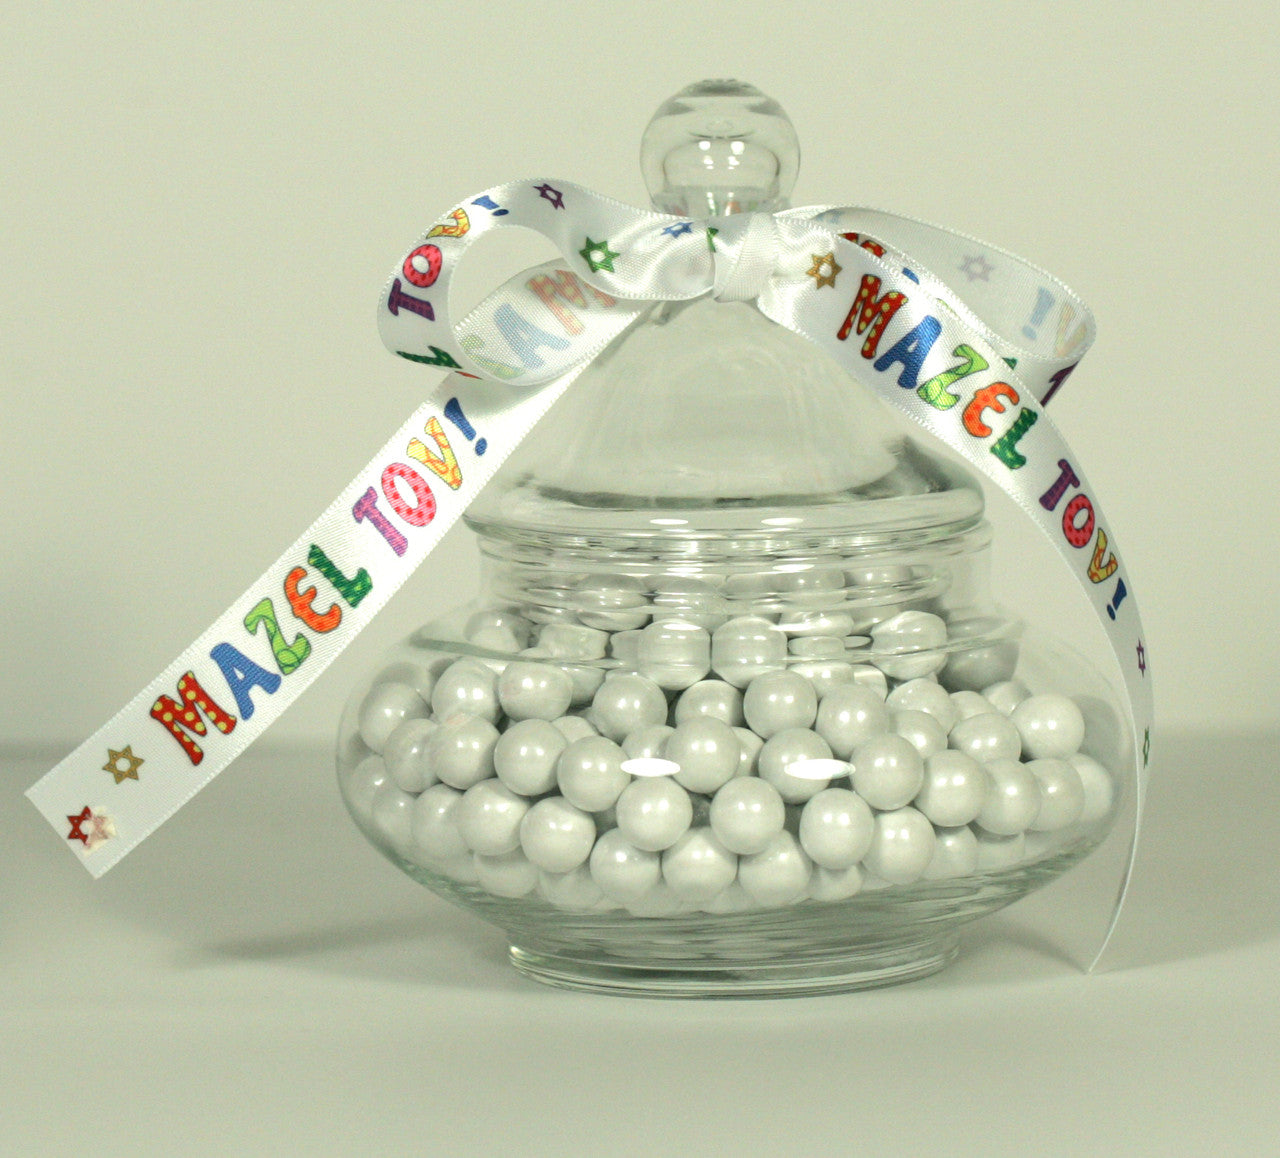 A fun ribbon to add to gift favors for Mitzvah's!